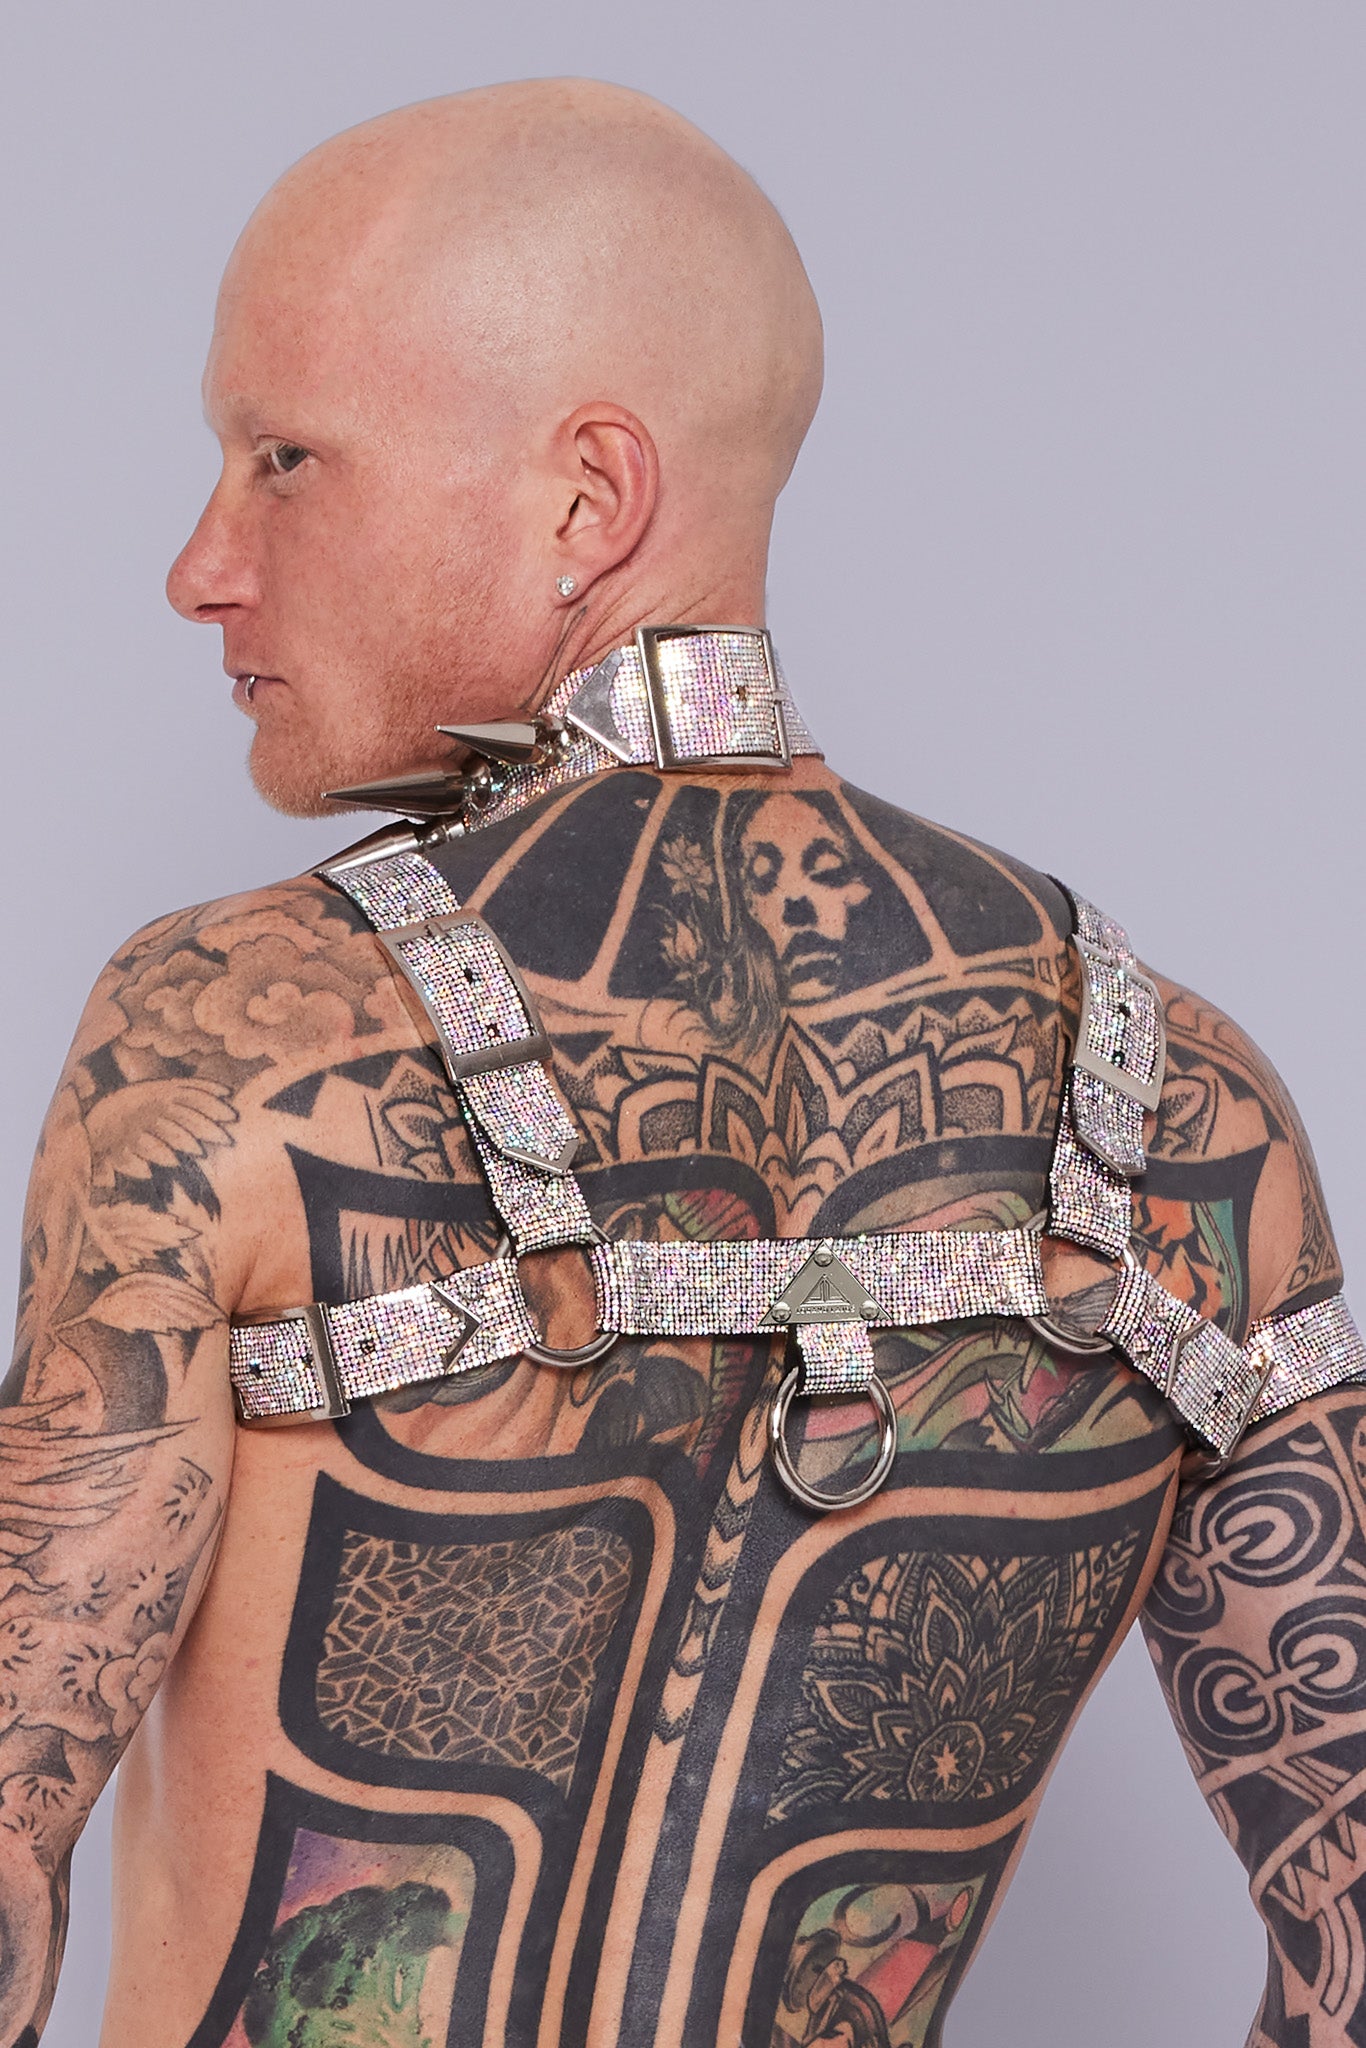 Bold and colorful H-Harness adorned with sparkling crystals, designed to make a statement and showcase your individuality at gay parties and events.